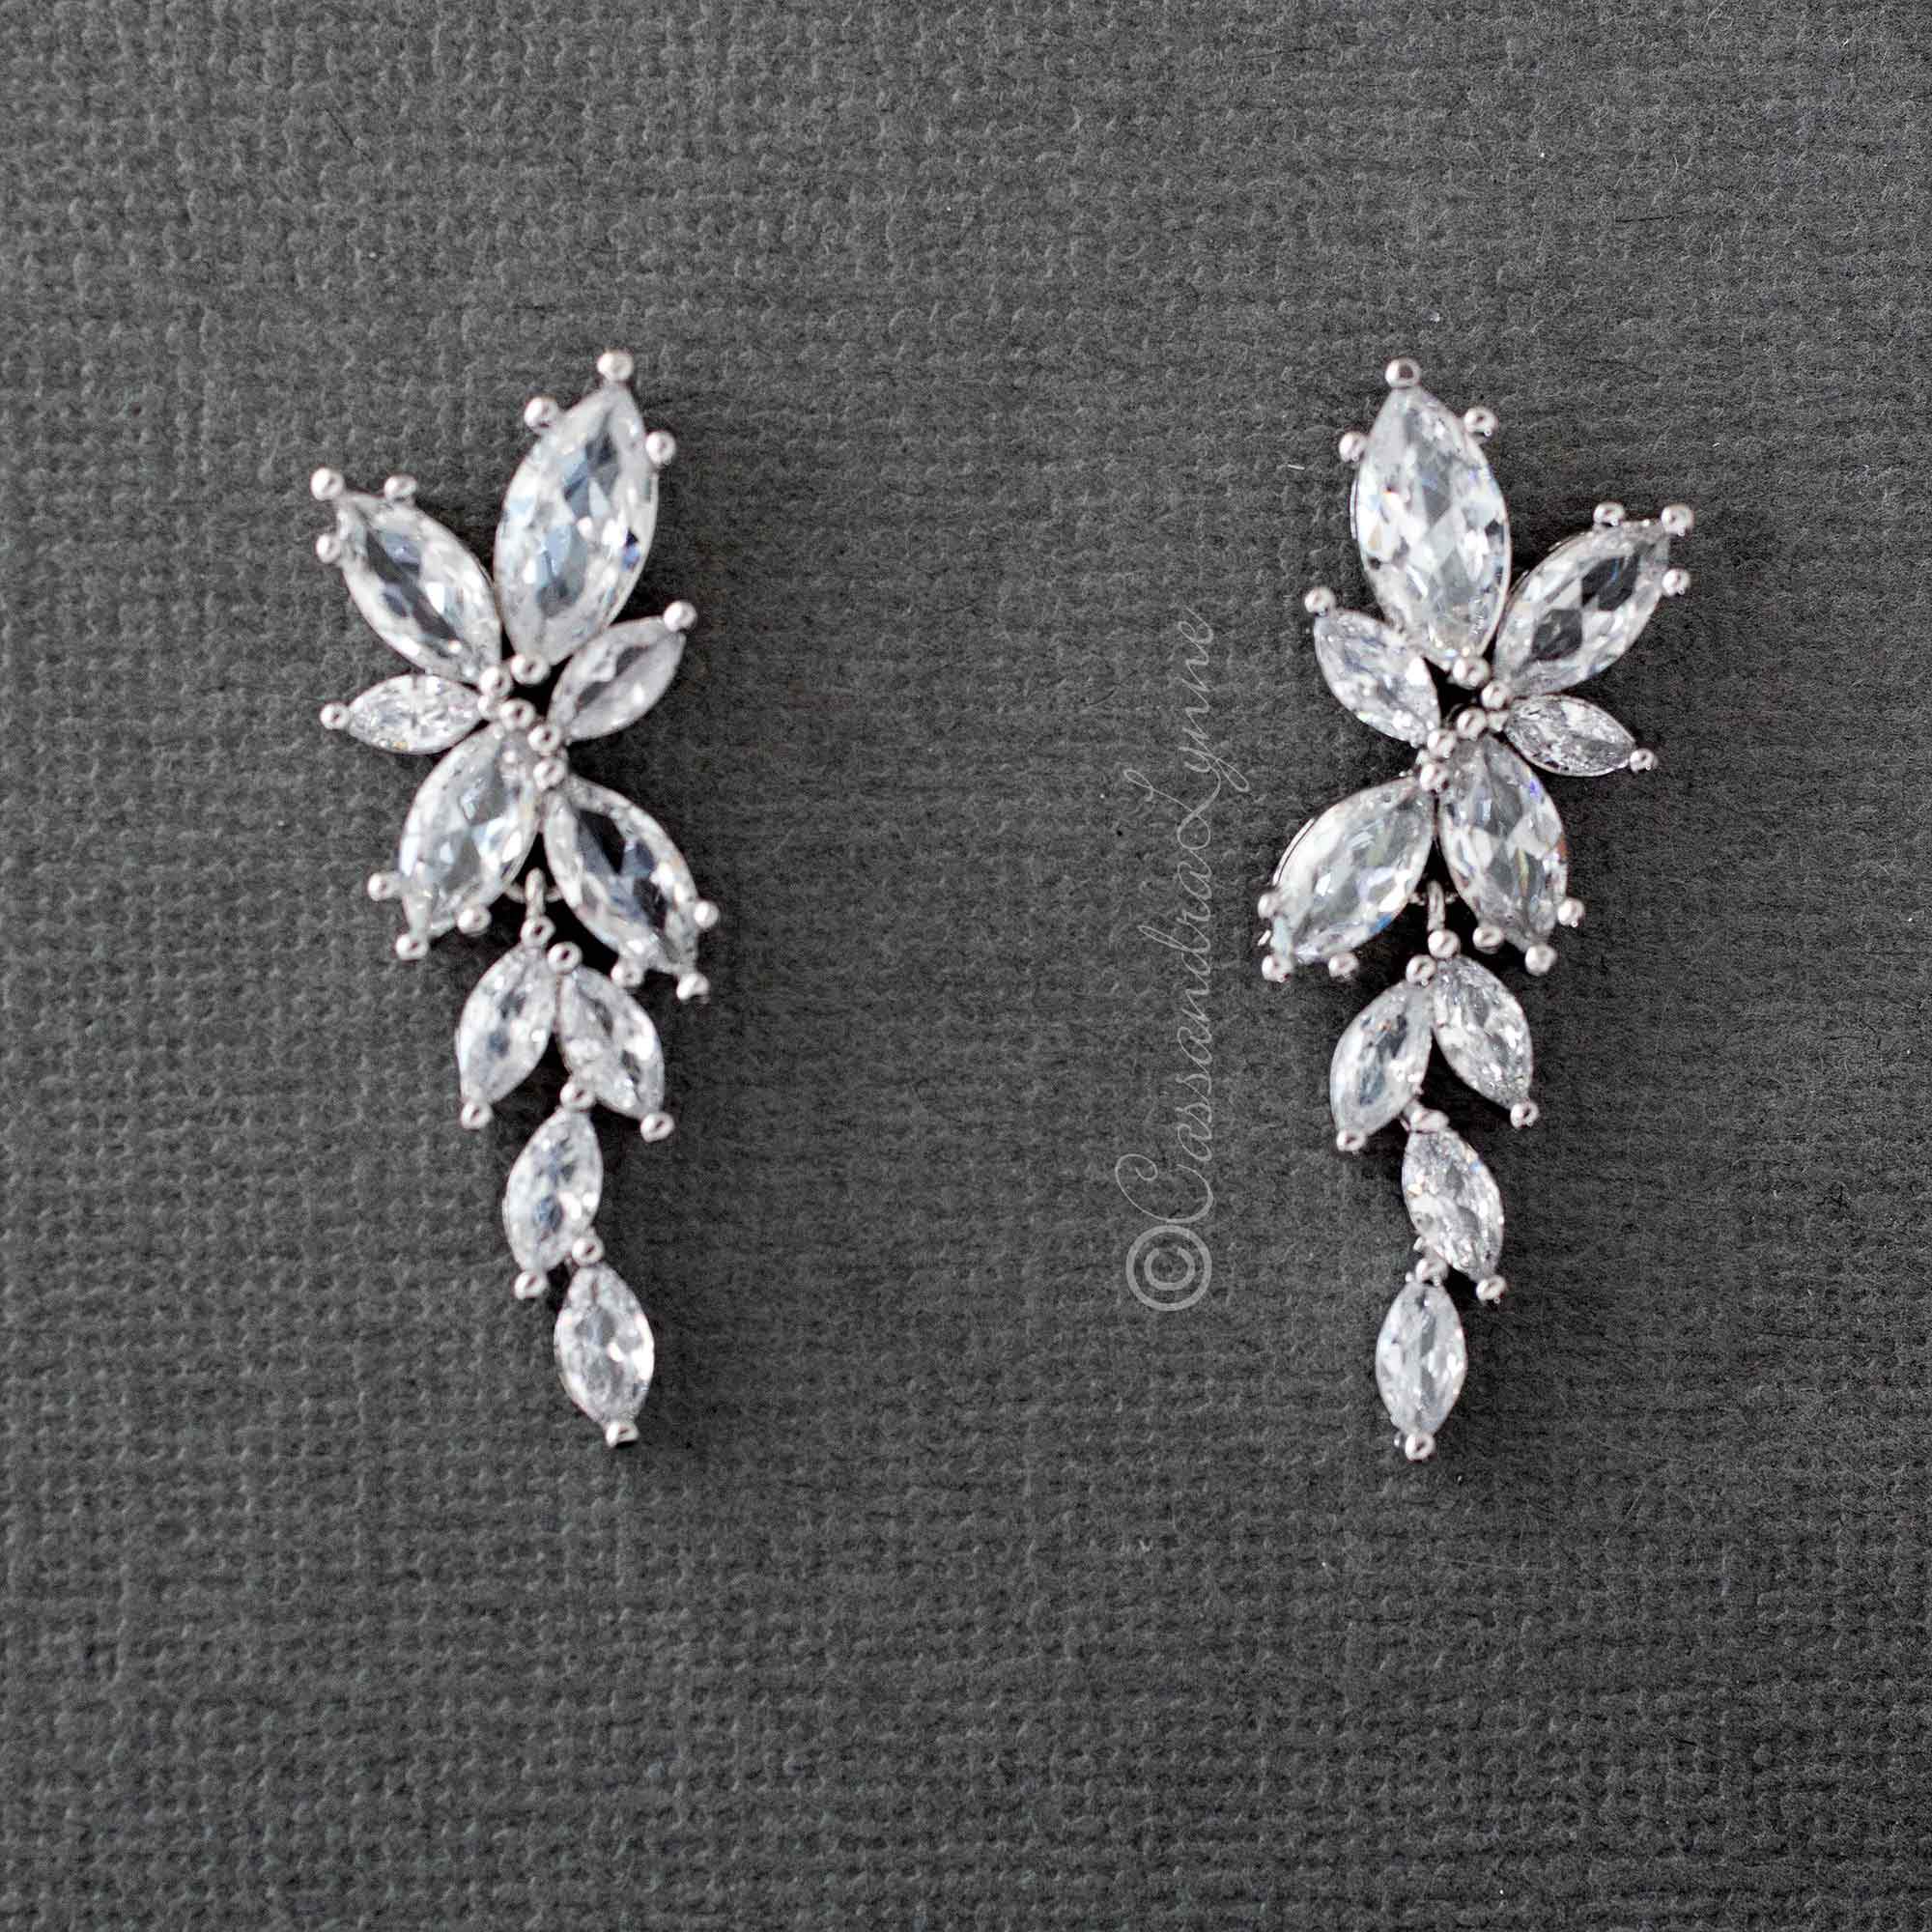 Bridal CZ Earrings of Marquise Flowers